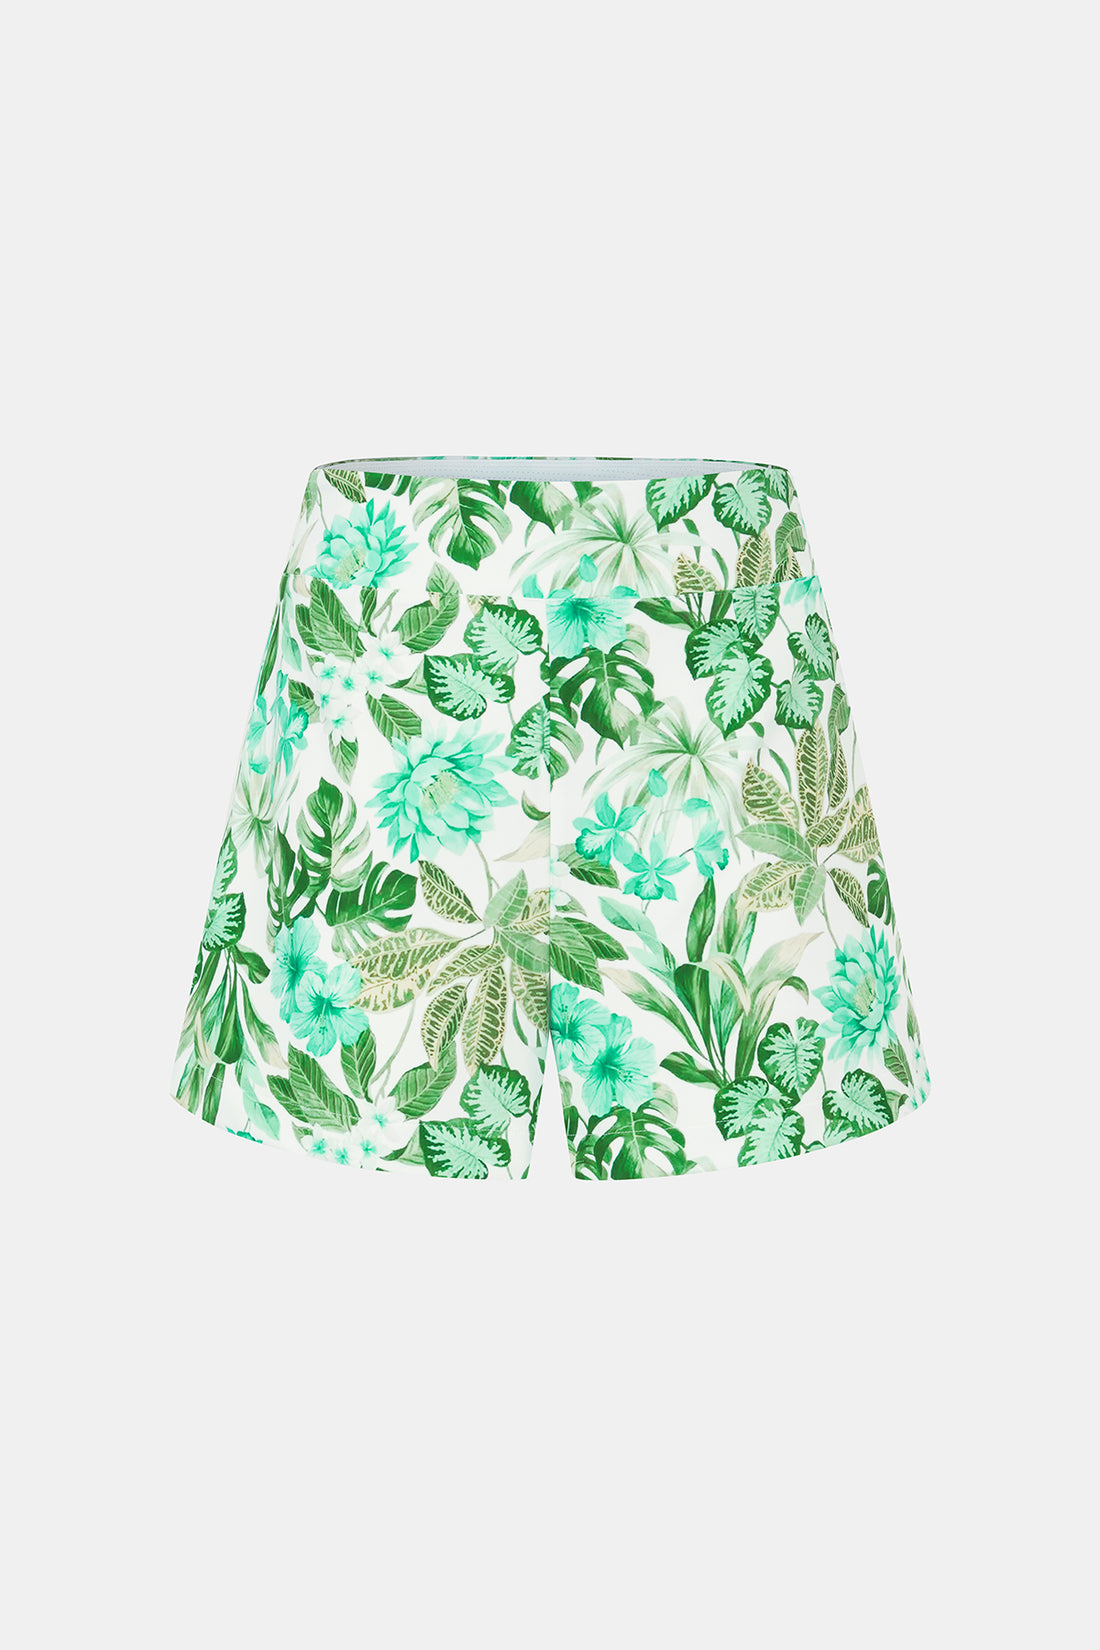 Printed A-Line Leisure Short